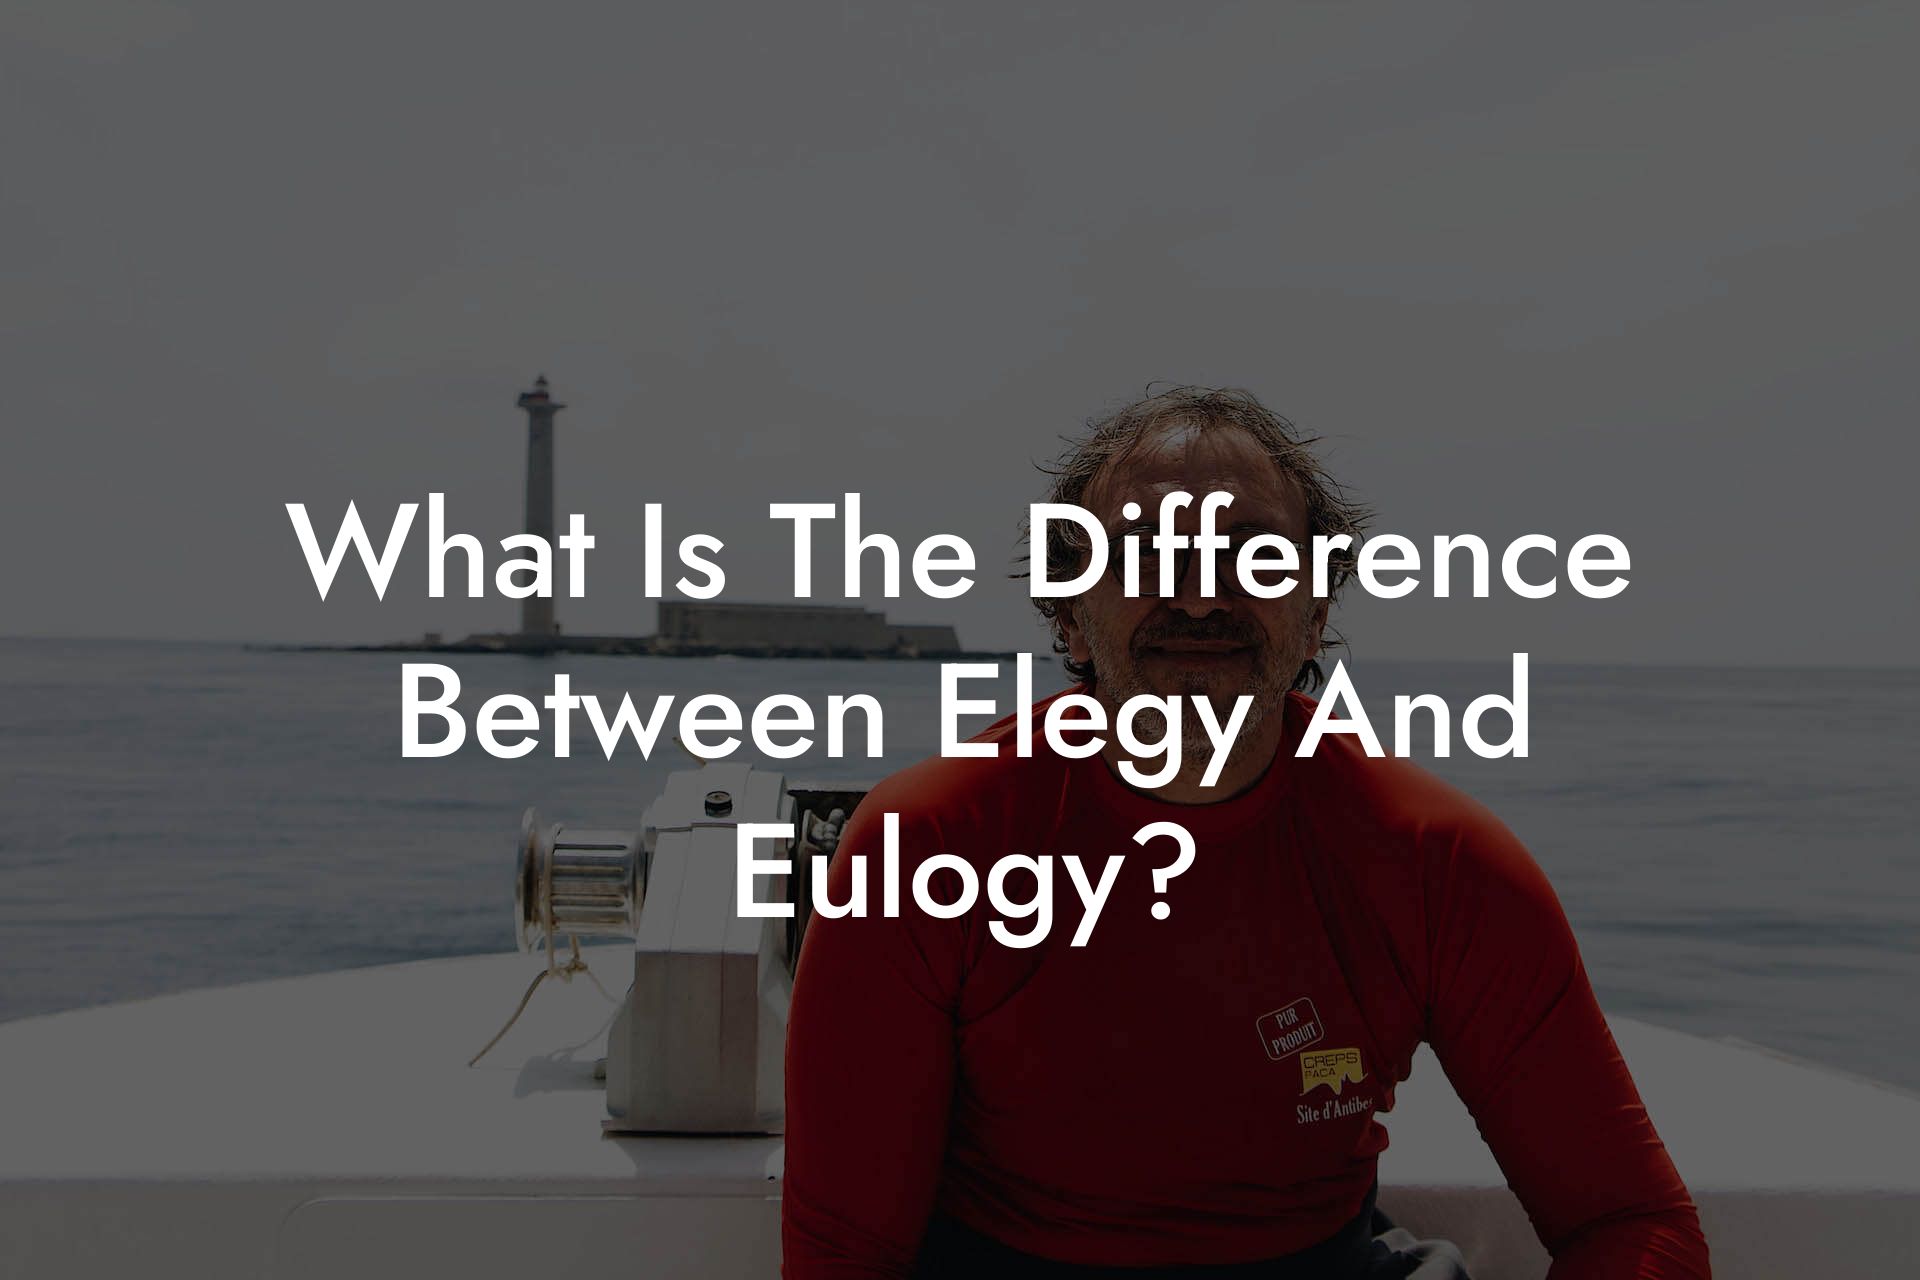 What Is The Difference Between Elegy And Eulogy